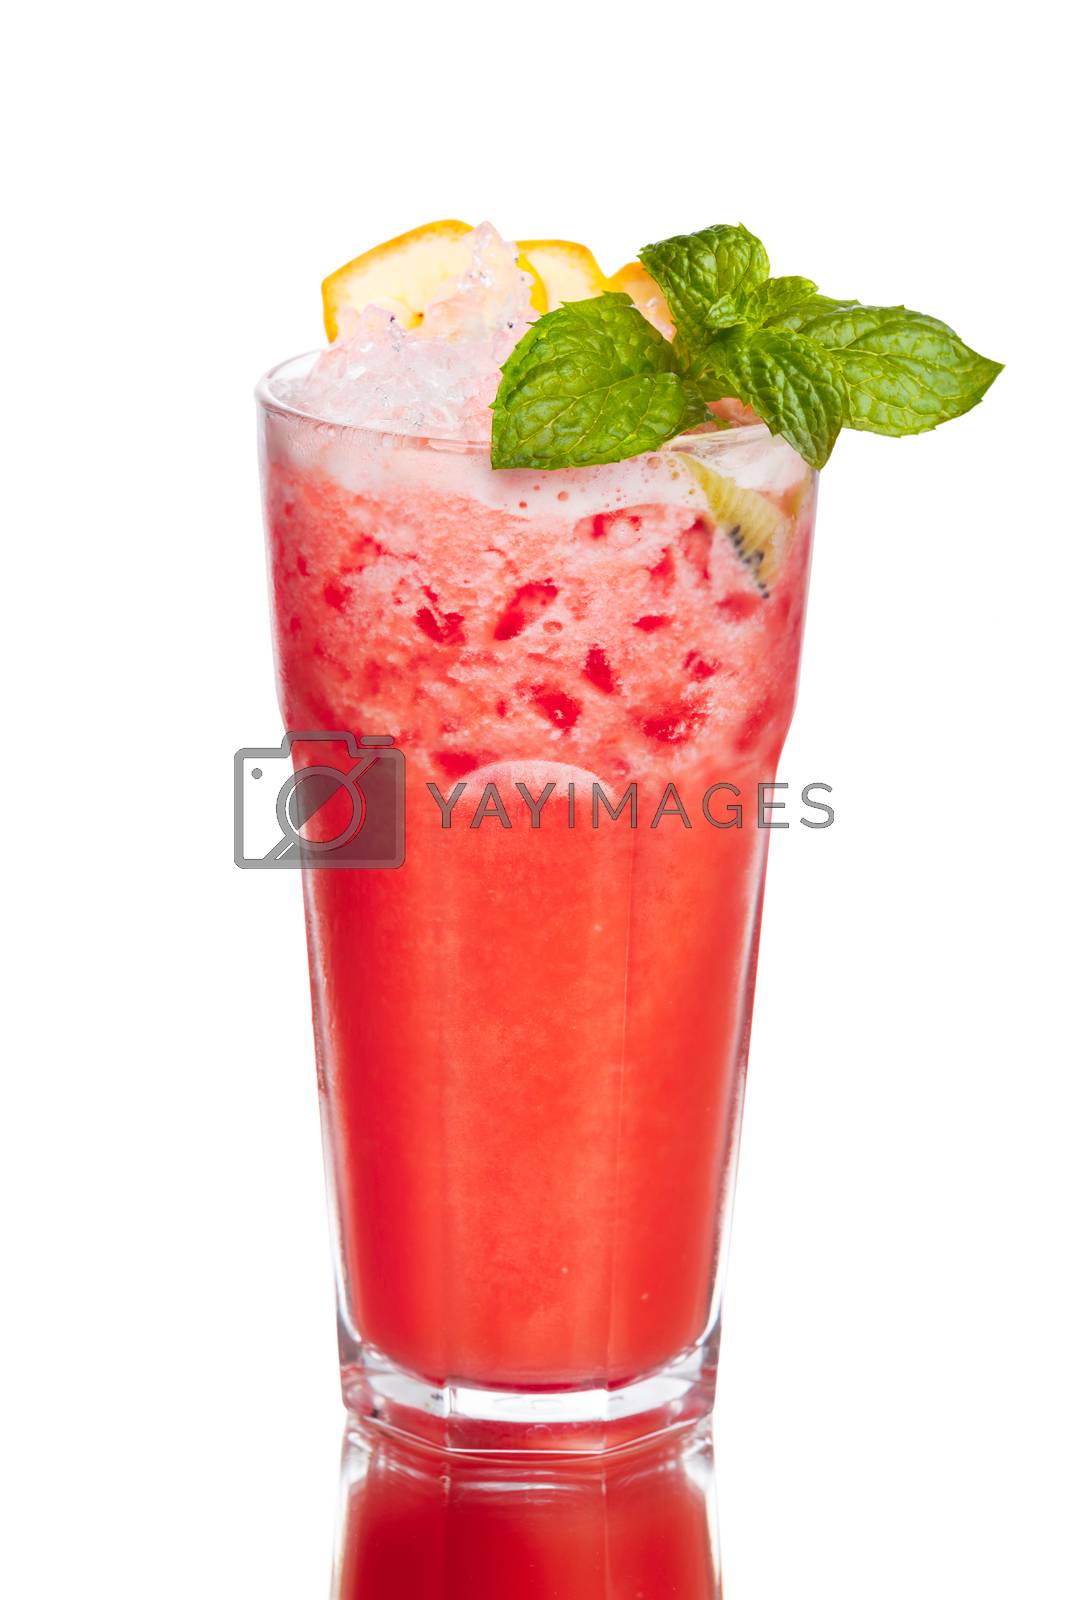 Royalty free image of Summer refreshing cocktail by maxsol